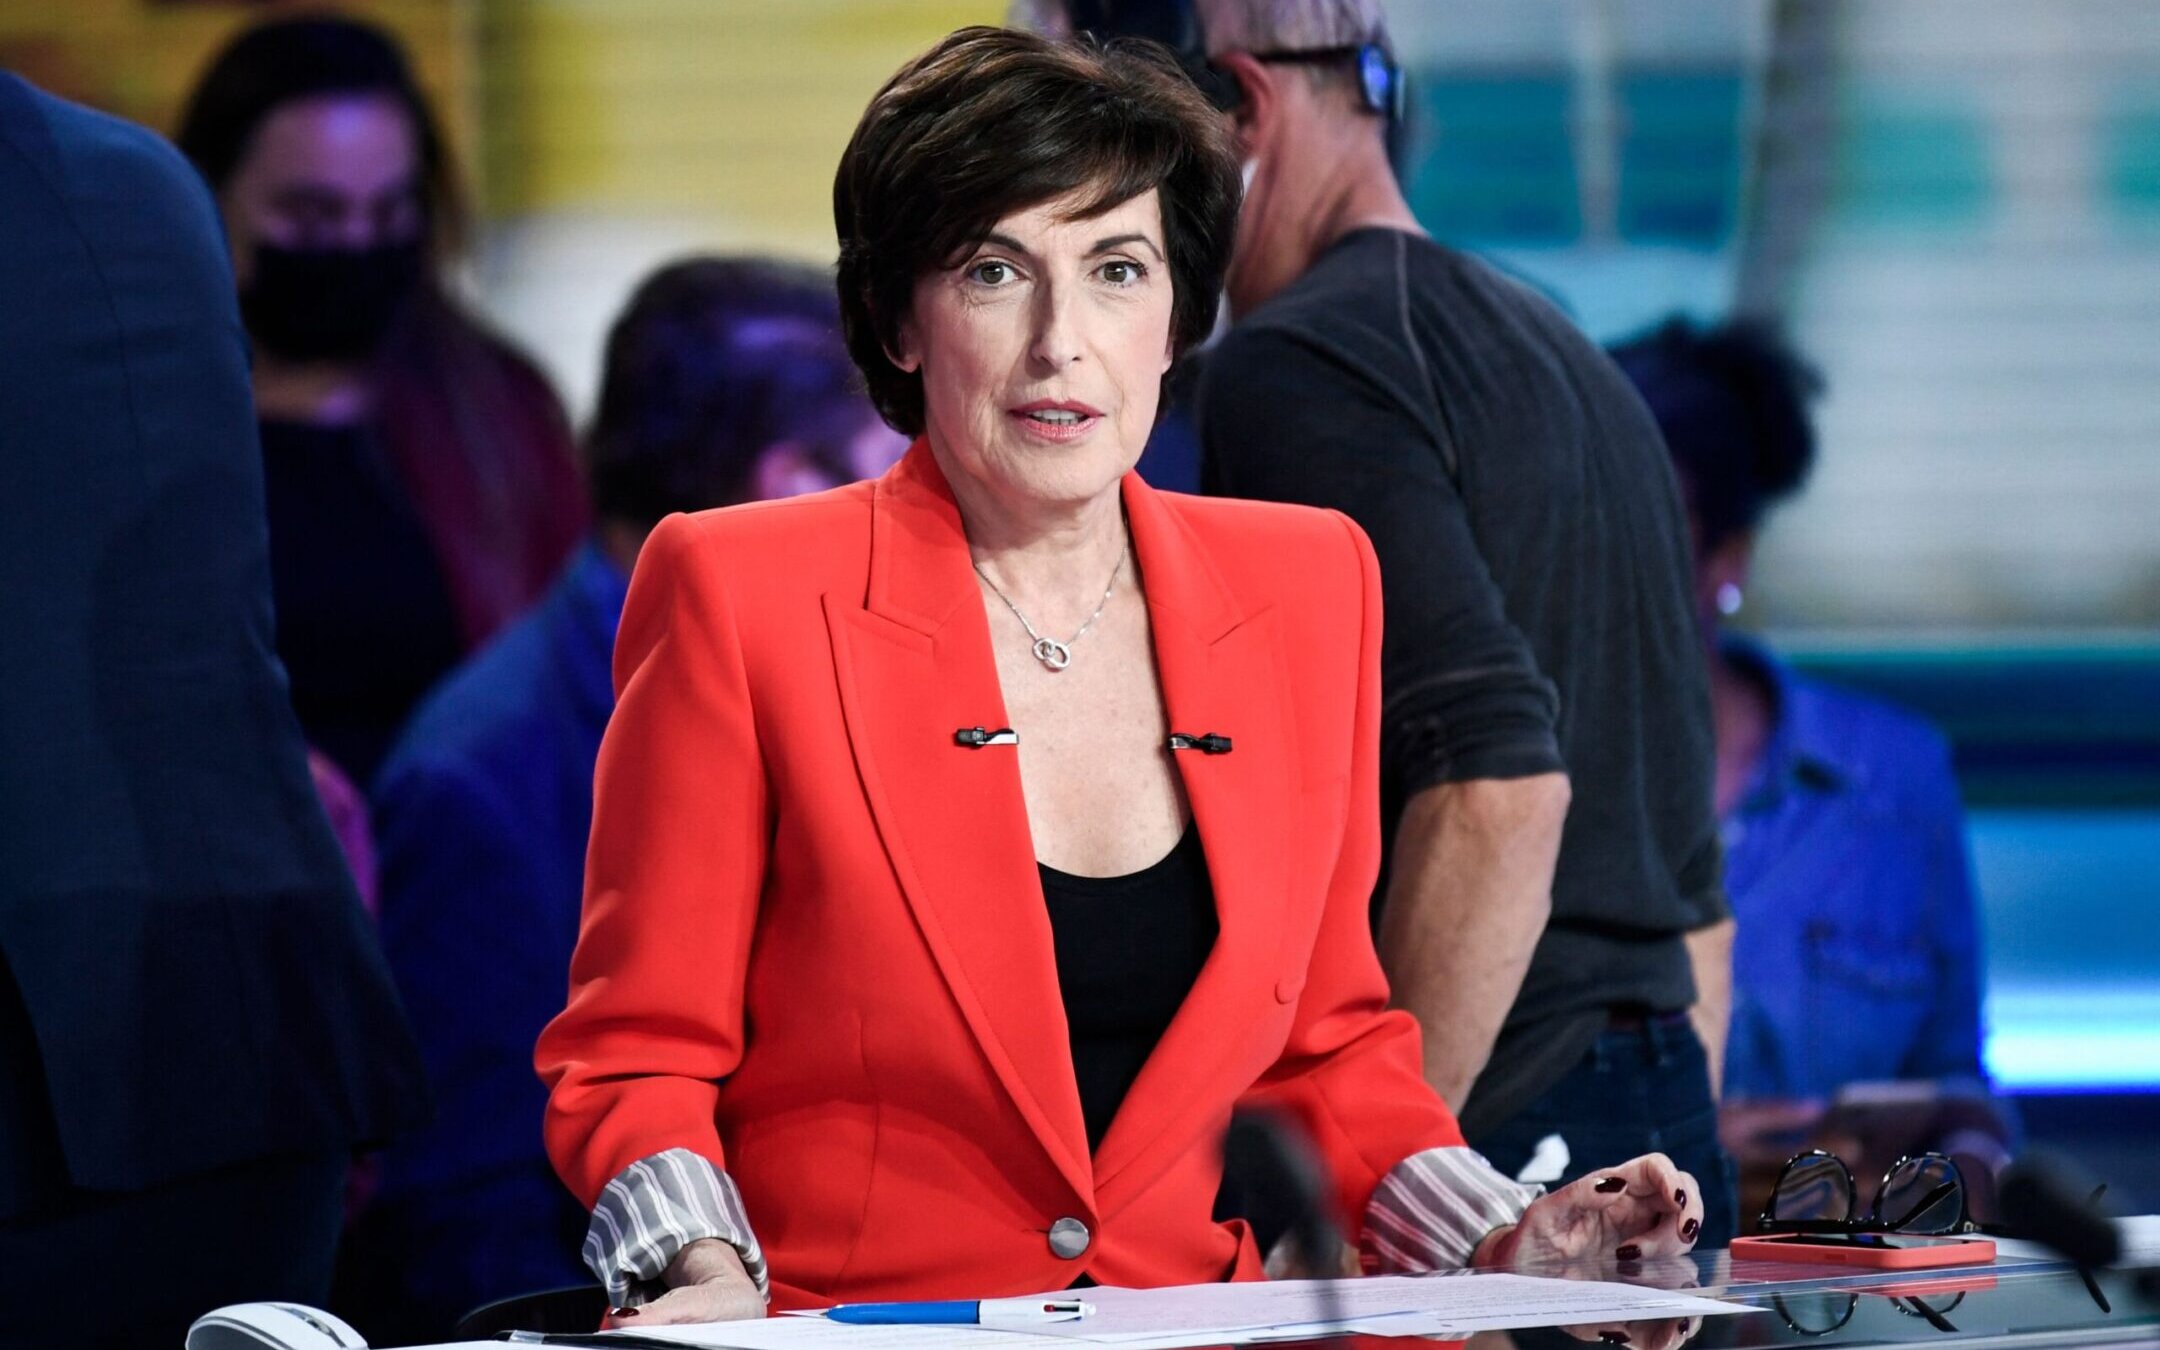 French TV host Ruth Elkrief looks on during a TV debate at LCI television studios in Paris, Sept. 22, 2021. (Photo by Stephane de Sakutin/AFP via Getty Images)